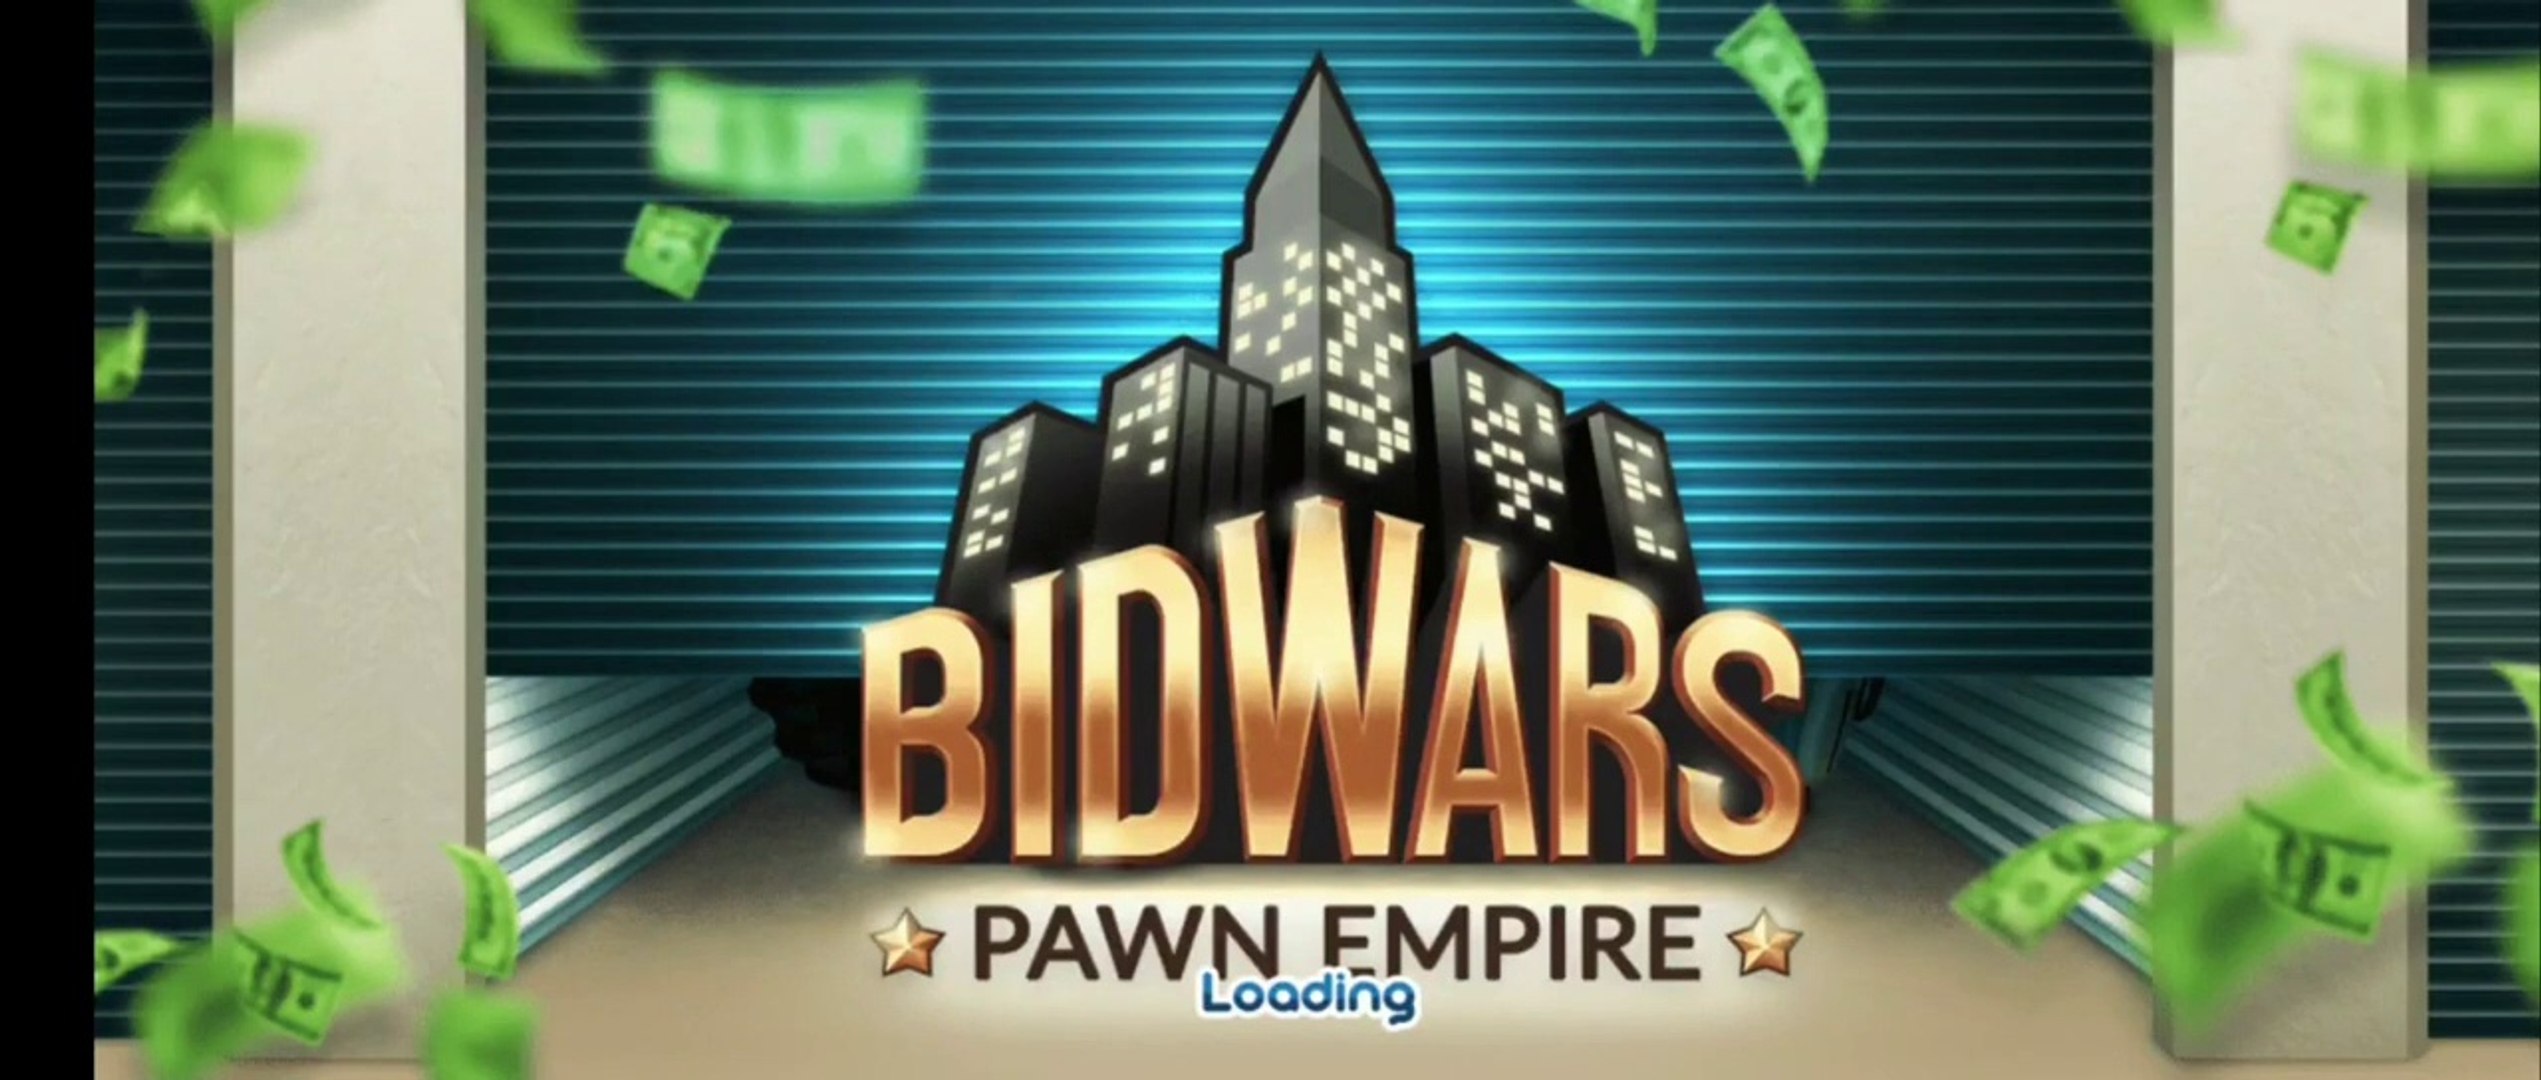 BID WARS: PAWN and game completed - Video Dailymotion